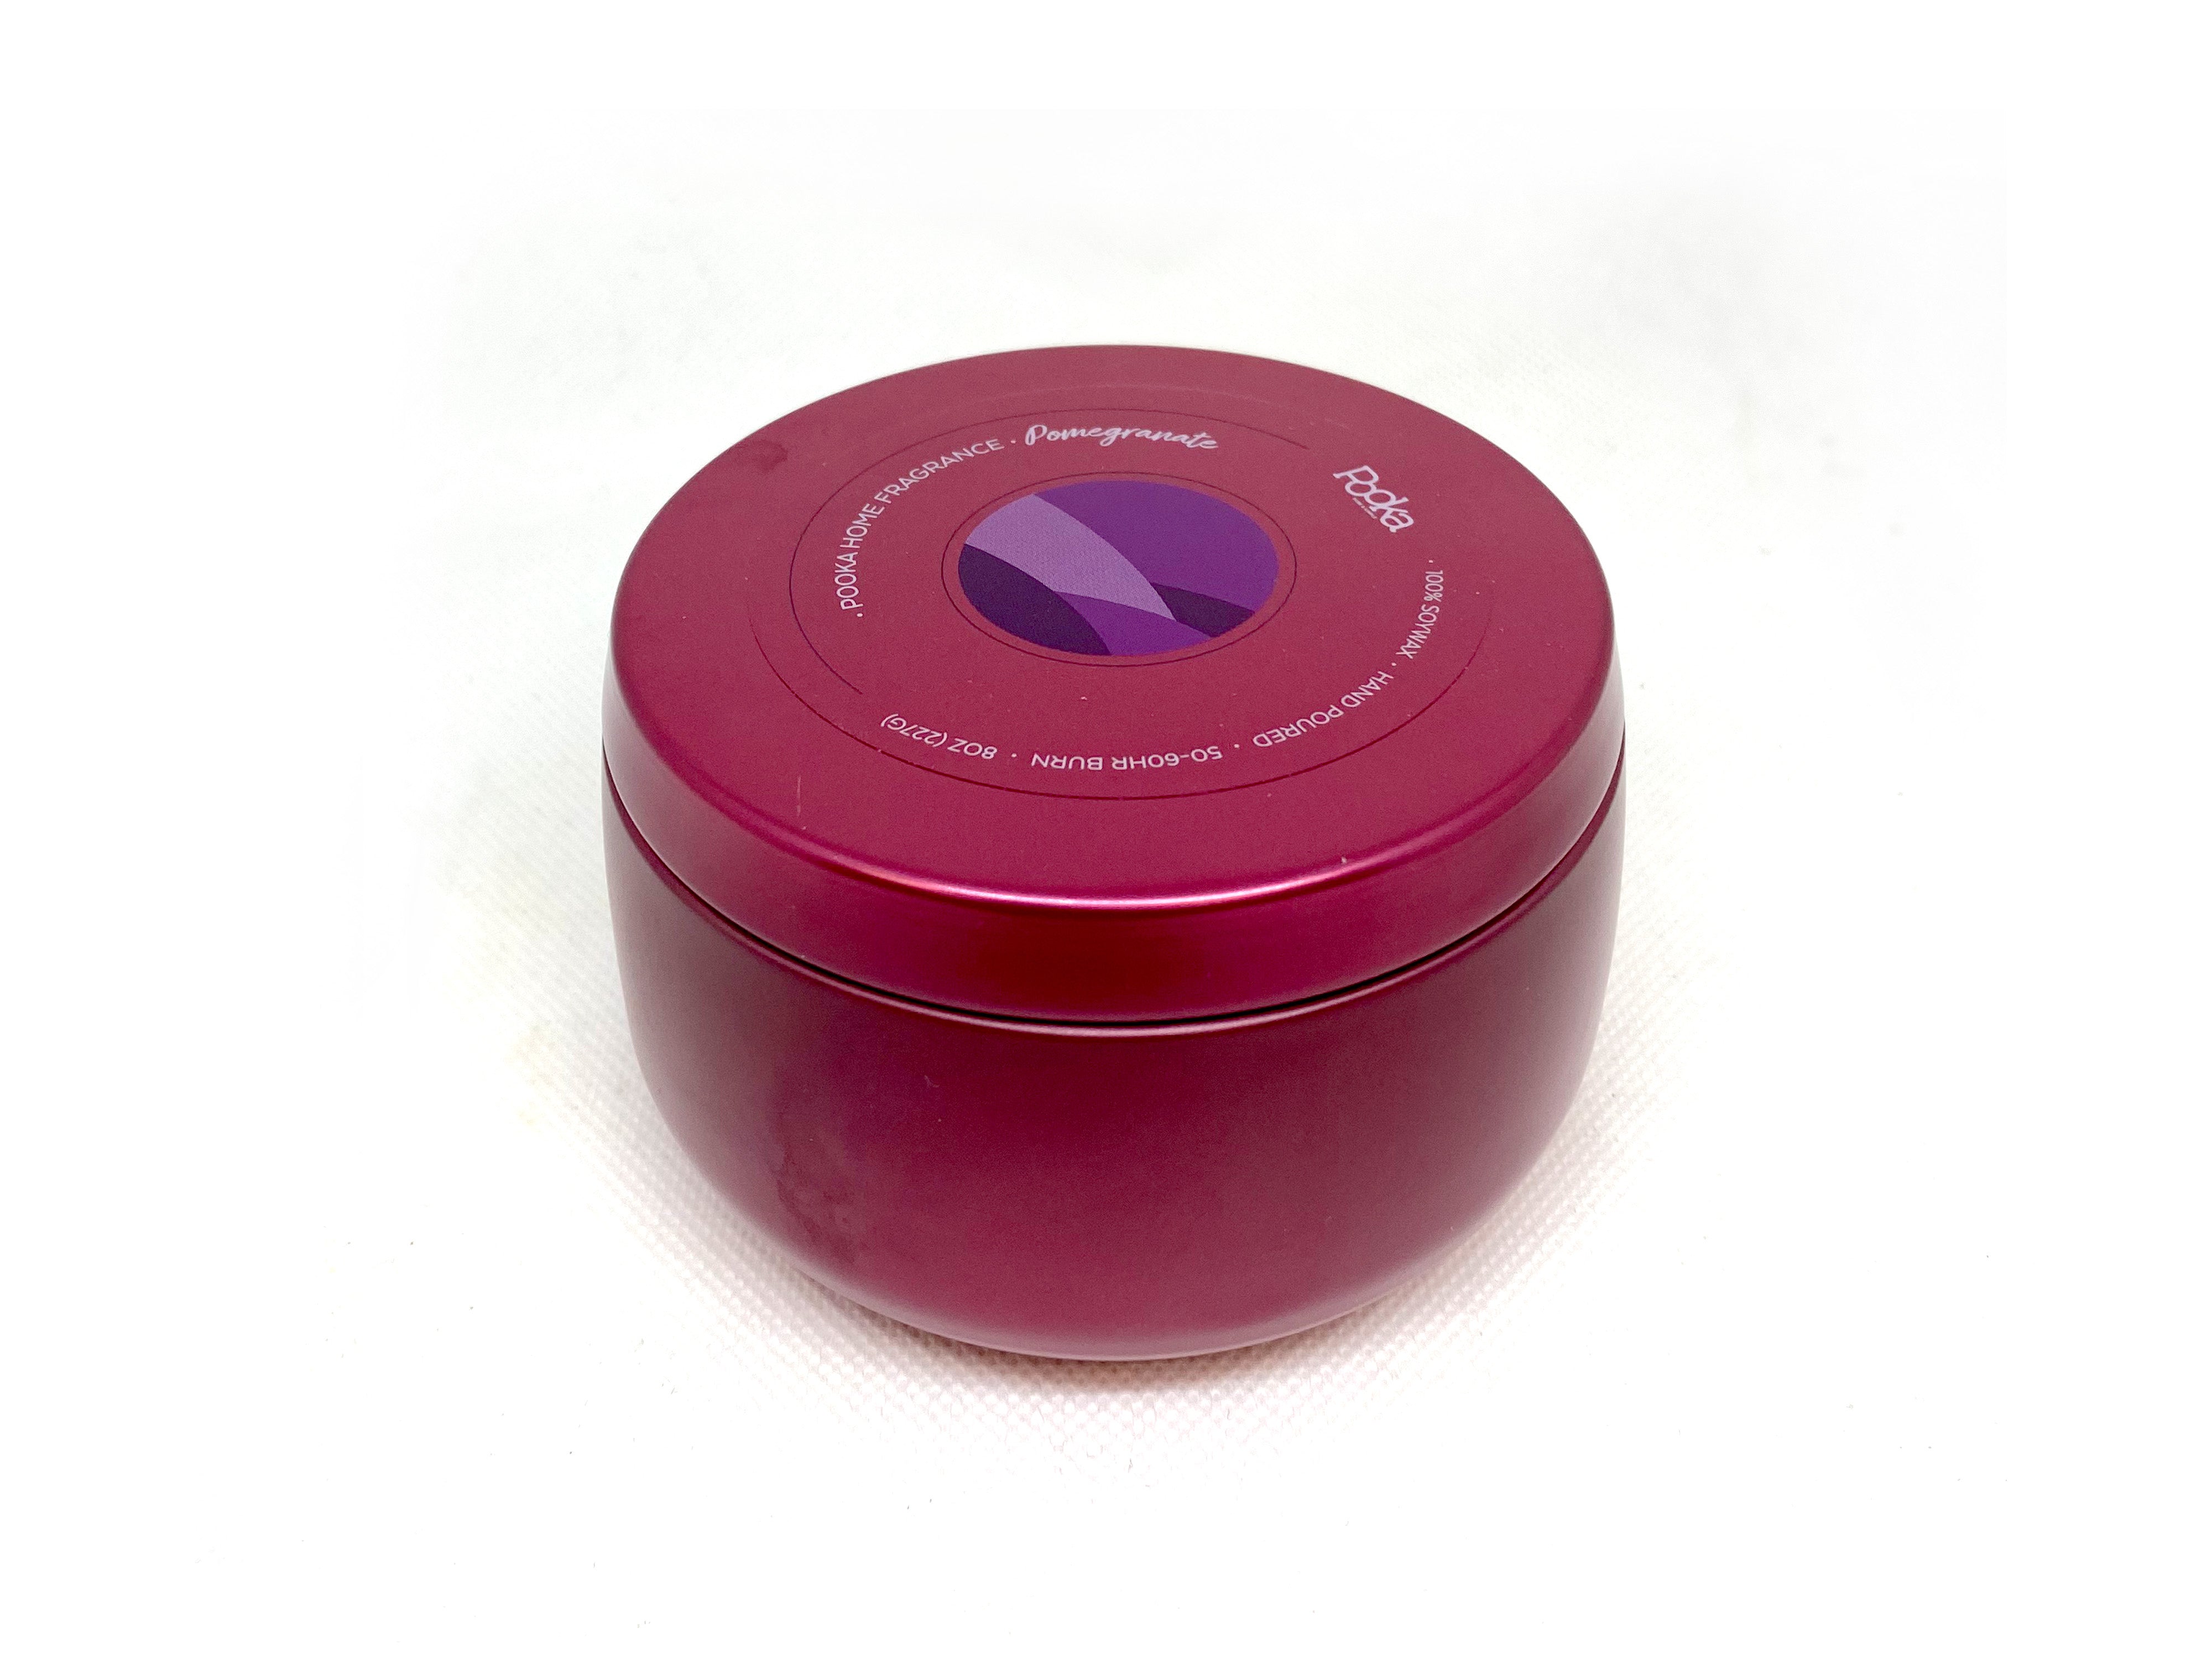 Pomegranate Soy Candle - Pooka Pure and Simple